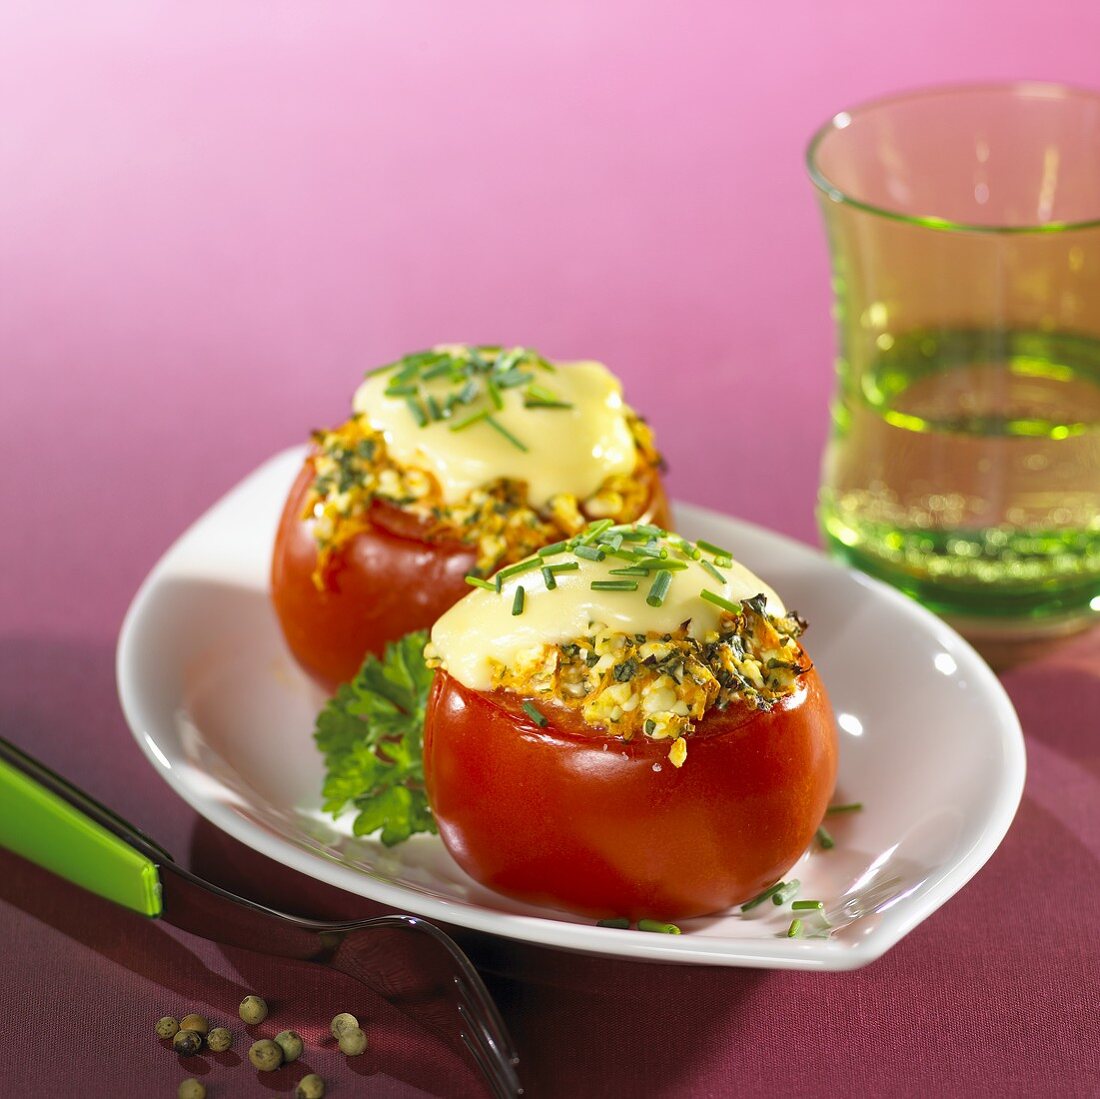 Stuffed tomatoes with melted cheese